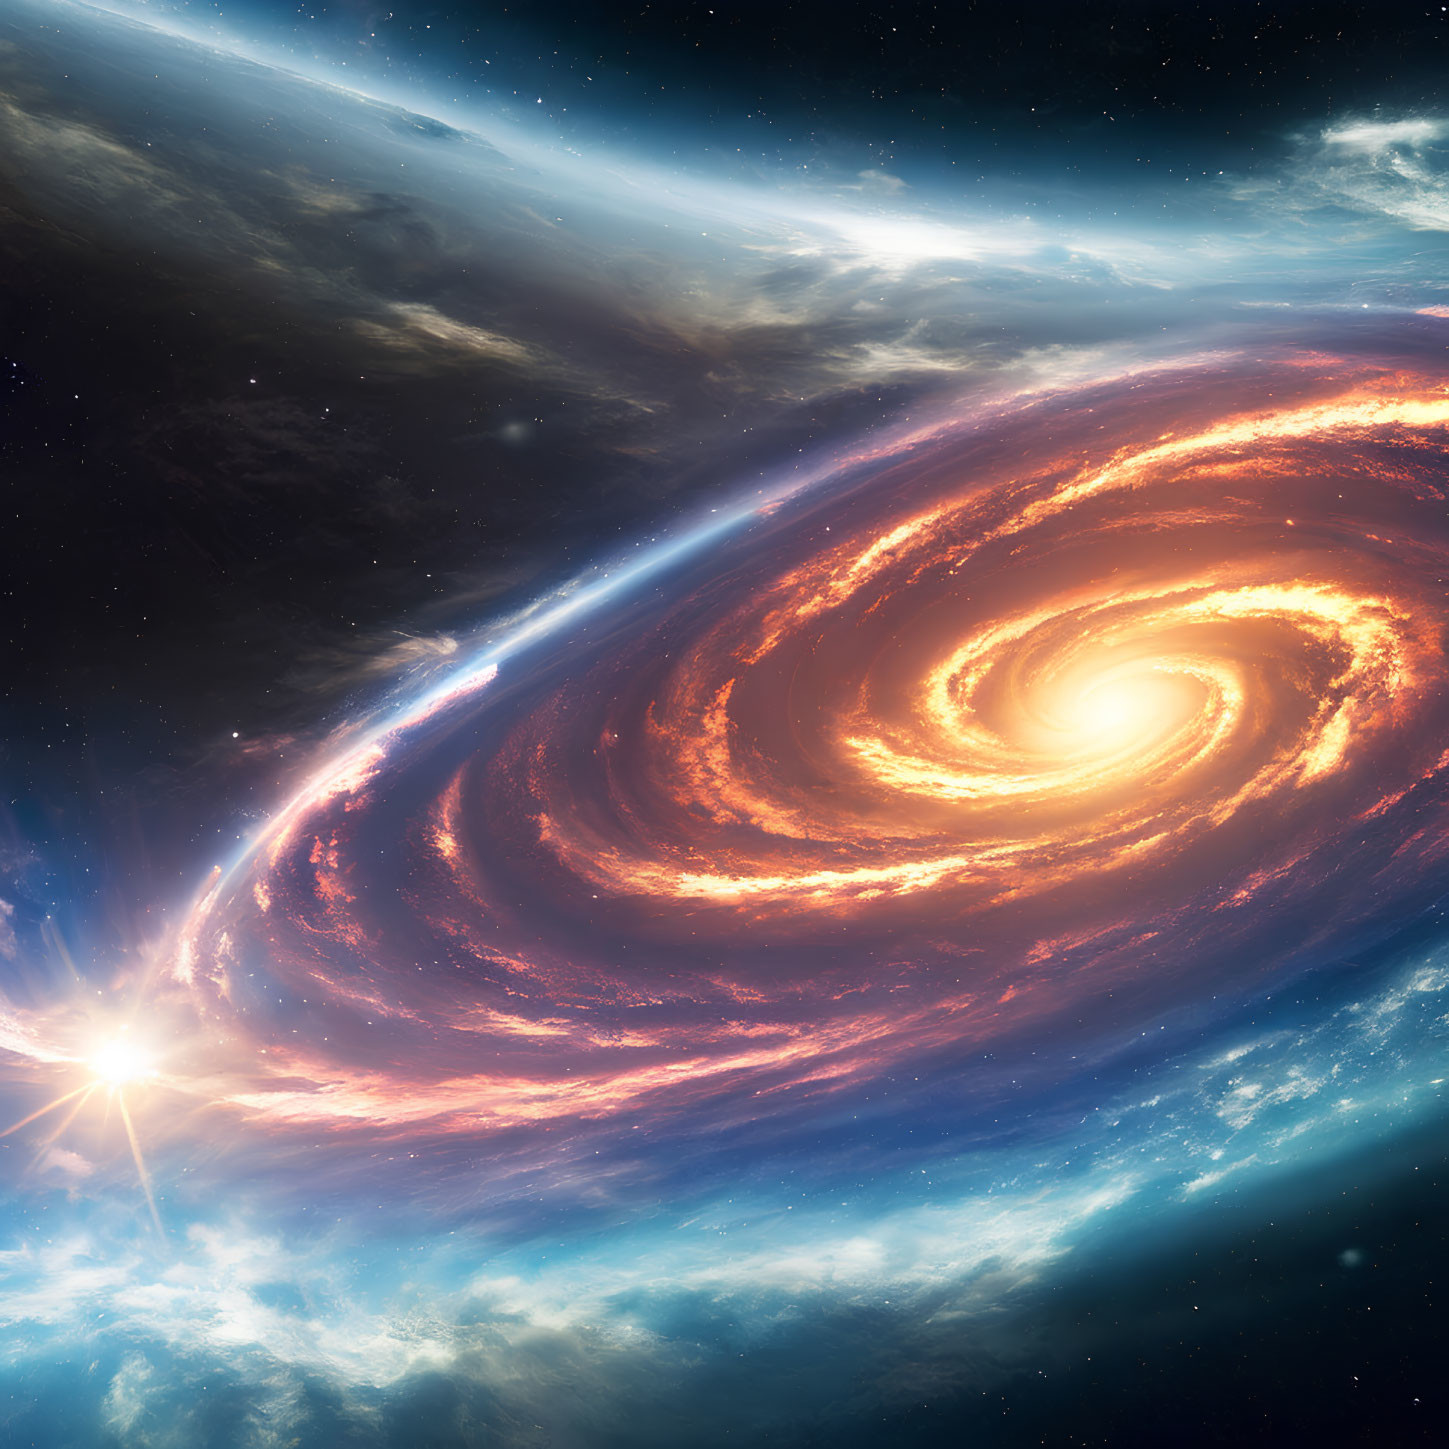 Swirling galaxy with bright stars and nebulous clouds